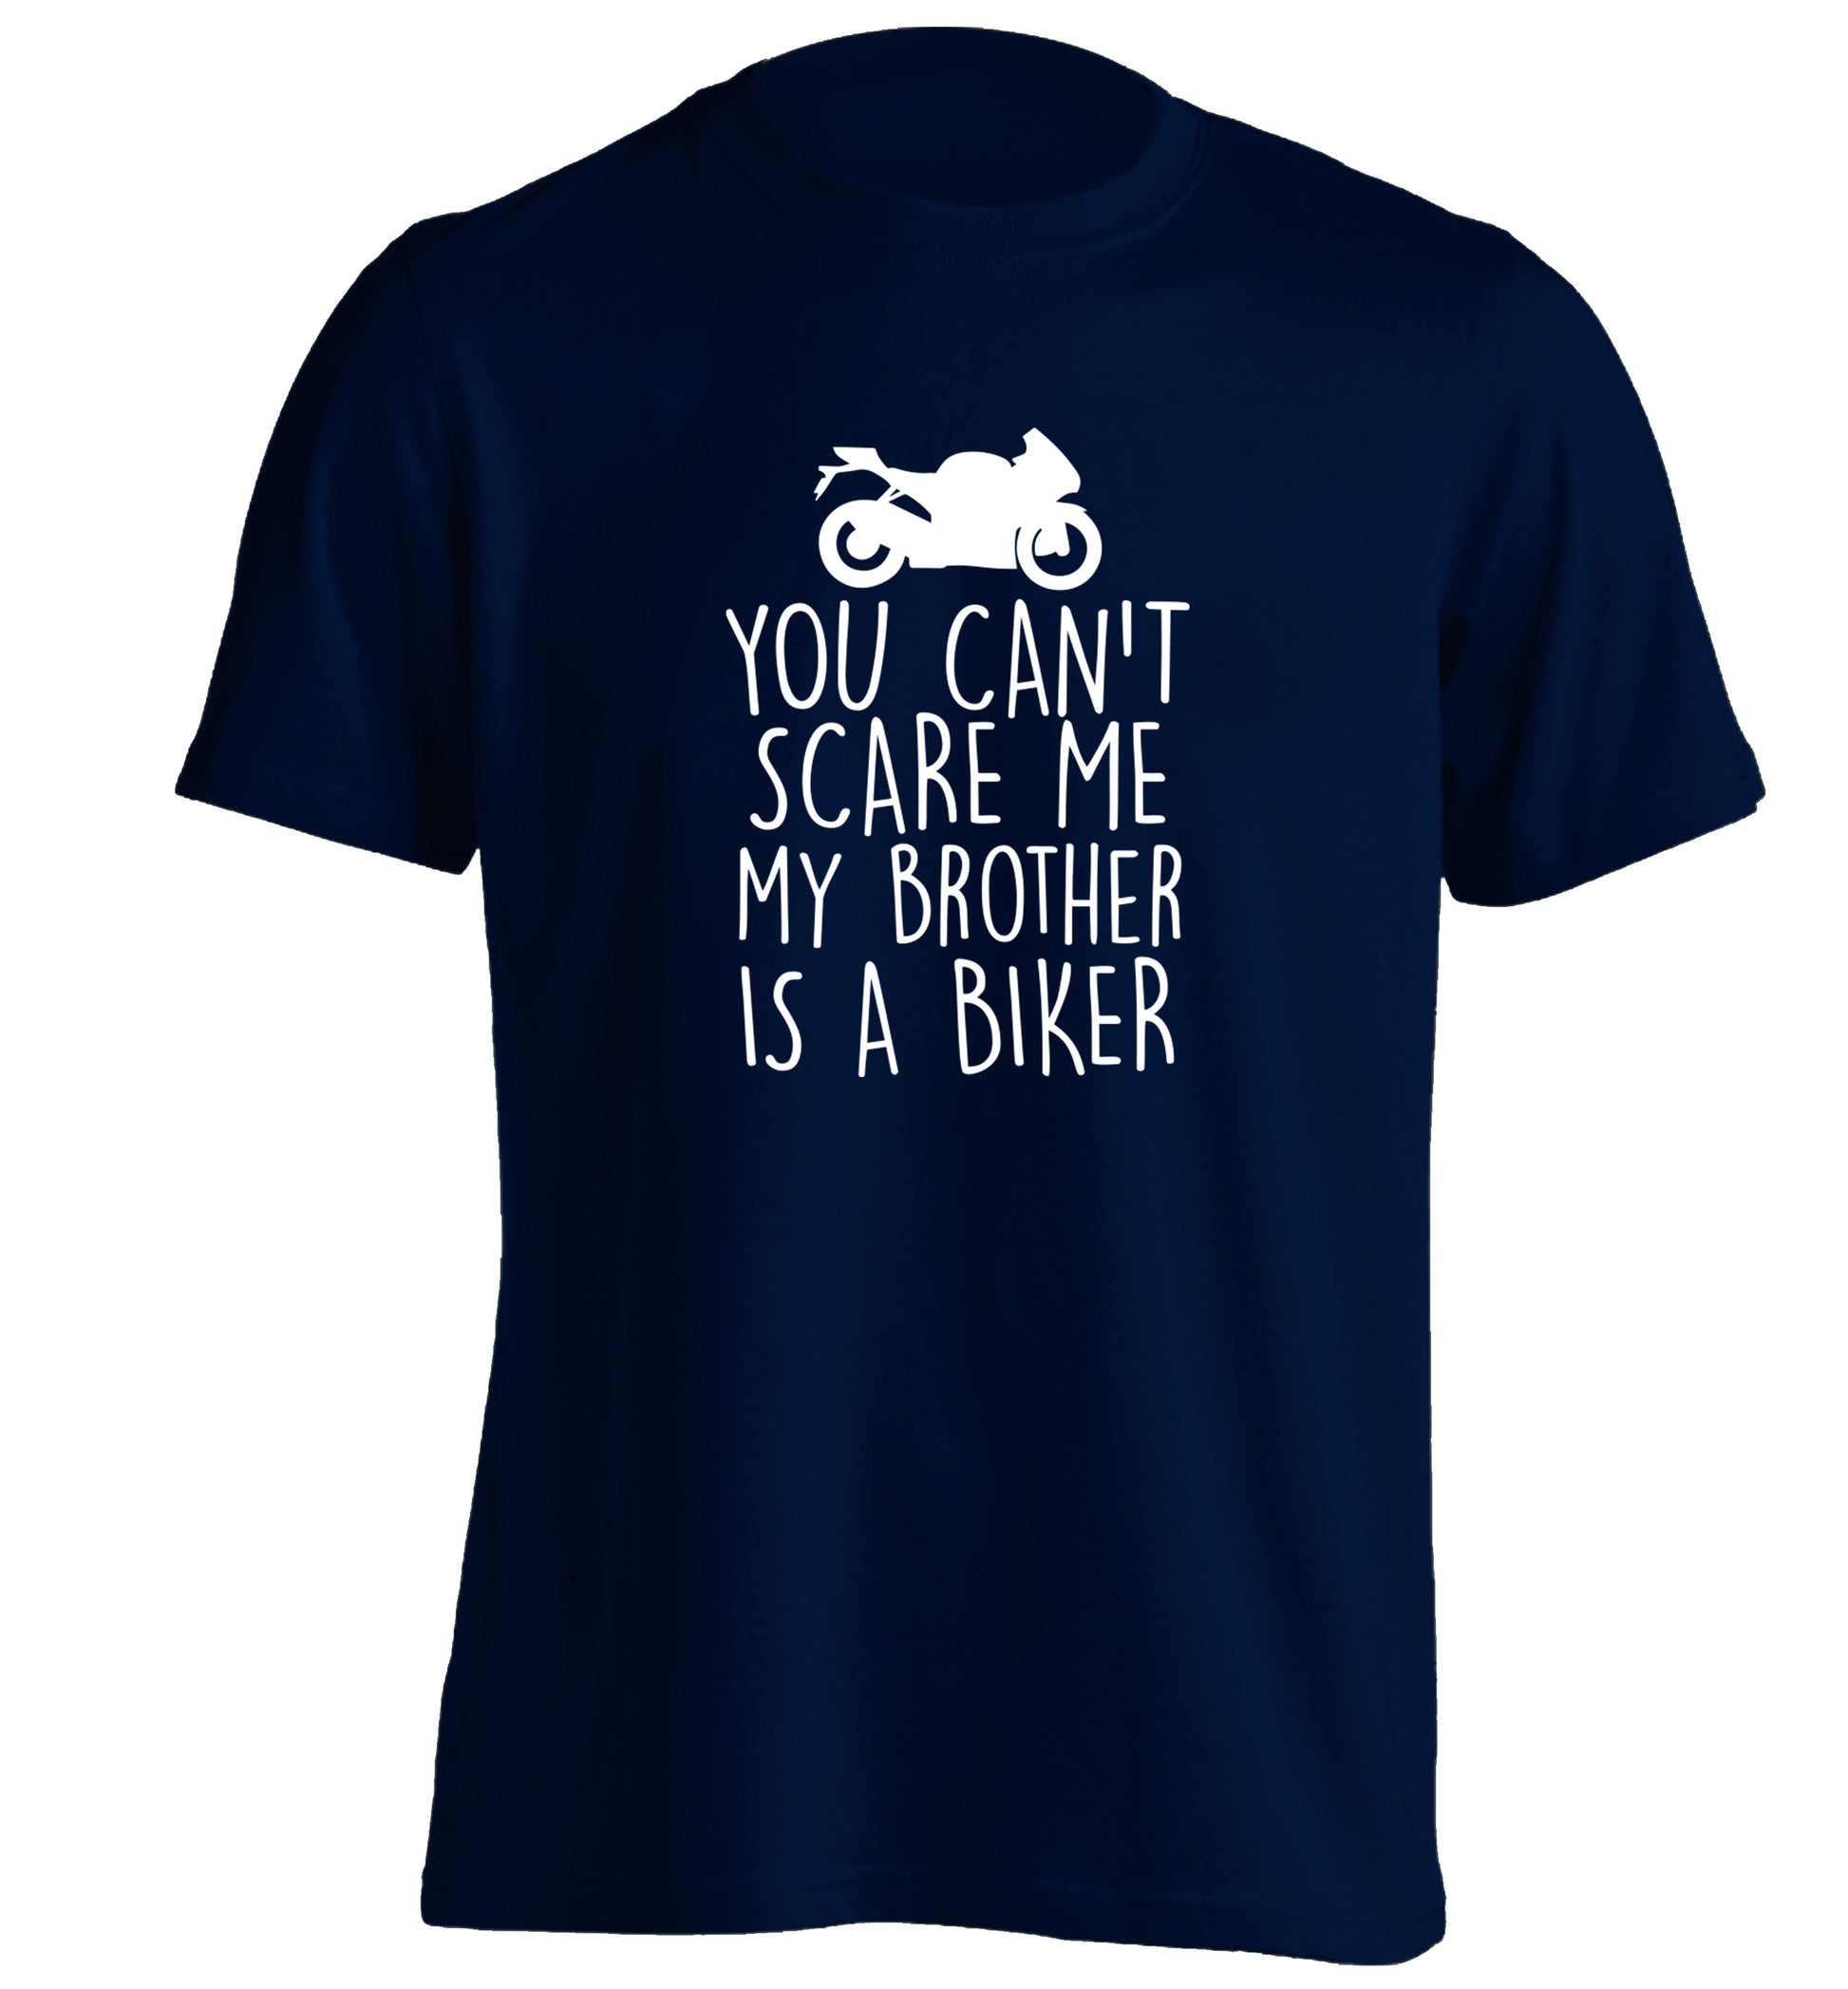 You can't scare me my brother is a biker adults unisex navy Tshirt 2XL